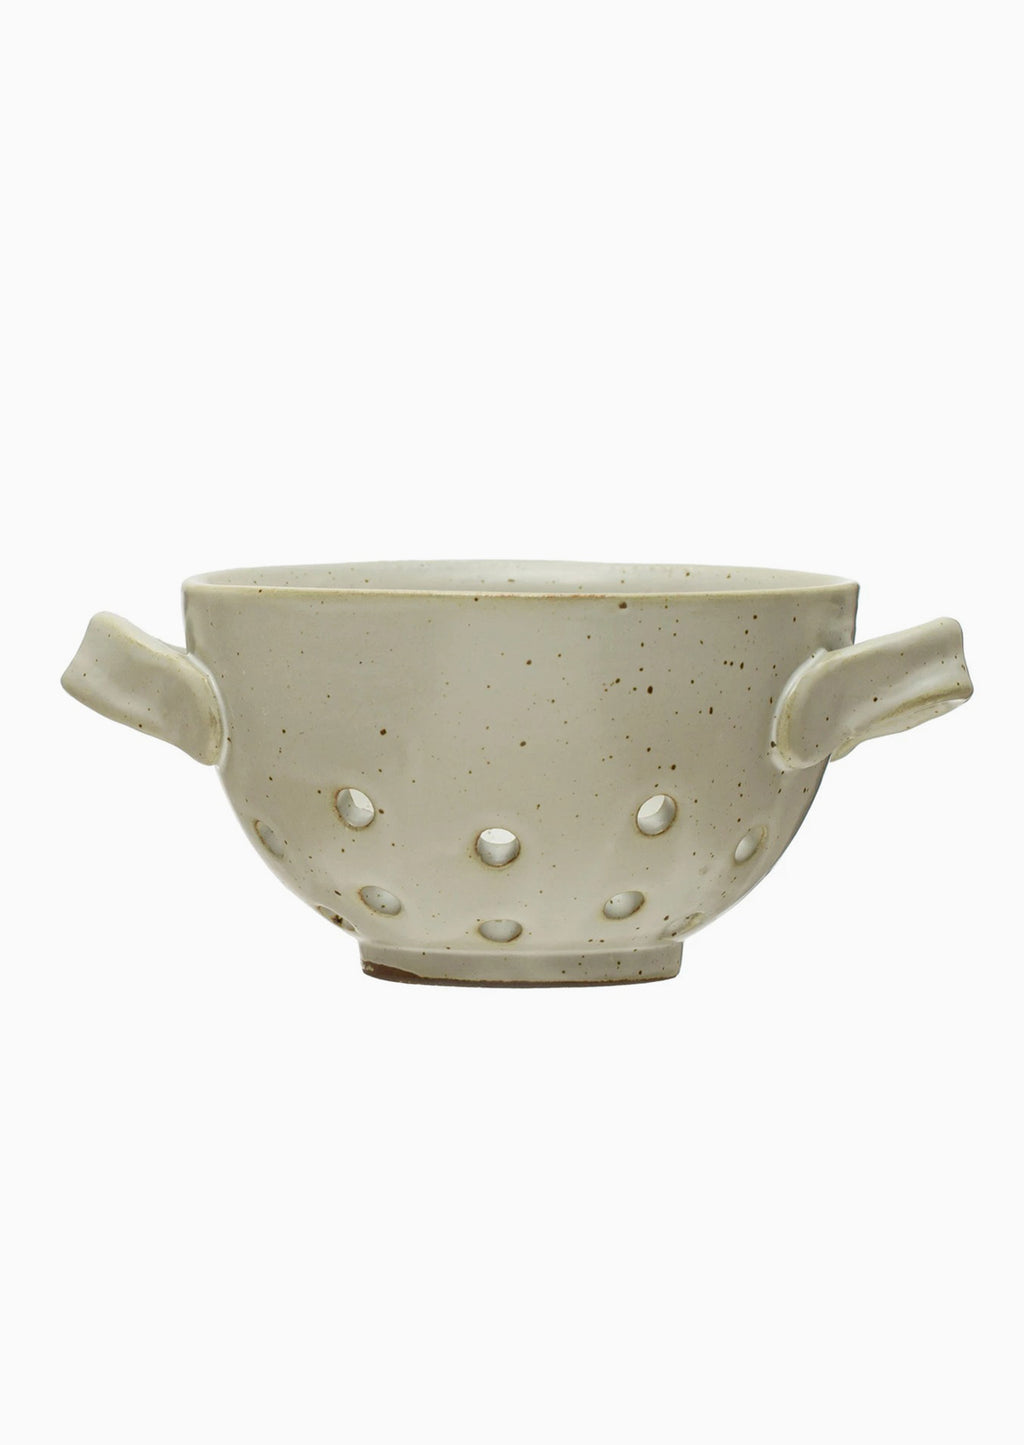 2: A small speckled ceramic berry colander with side handles.